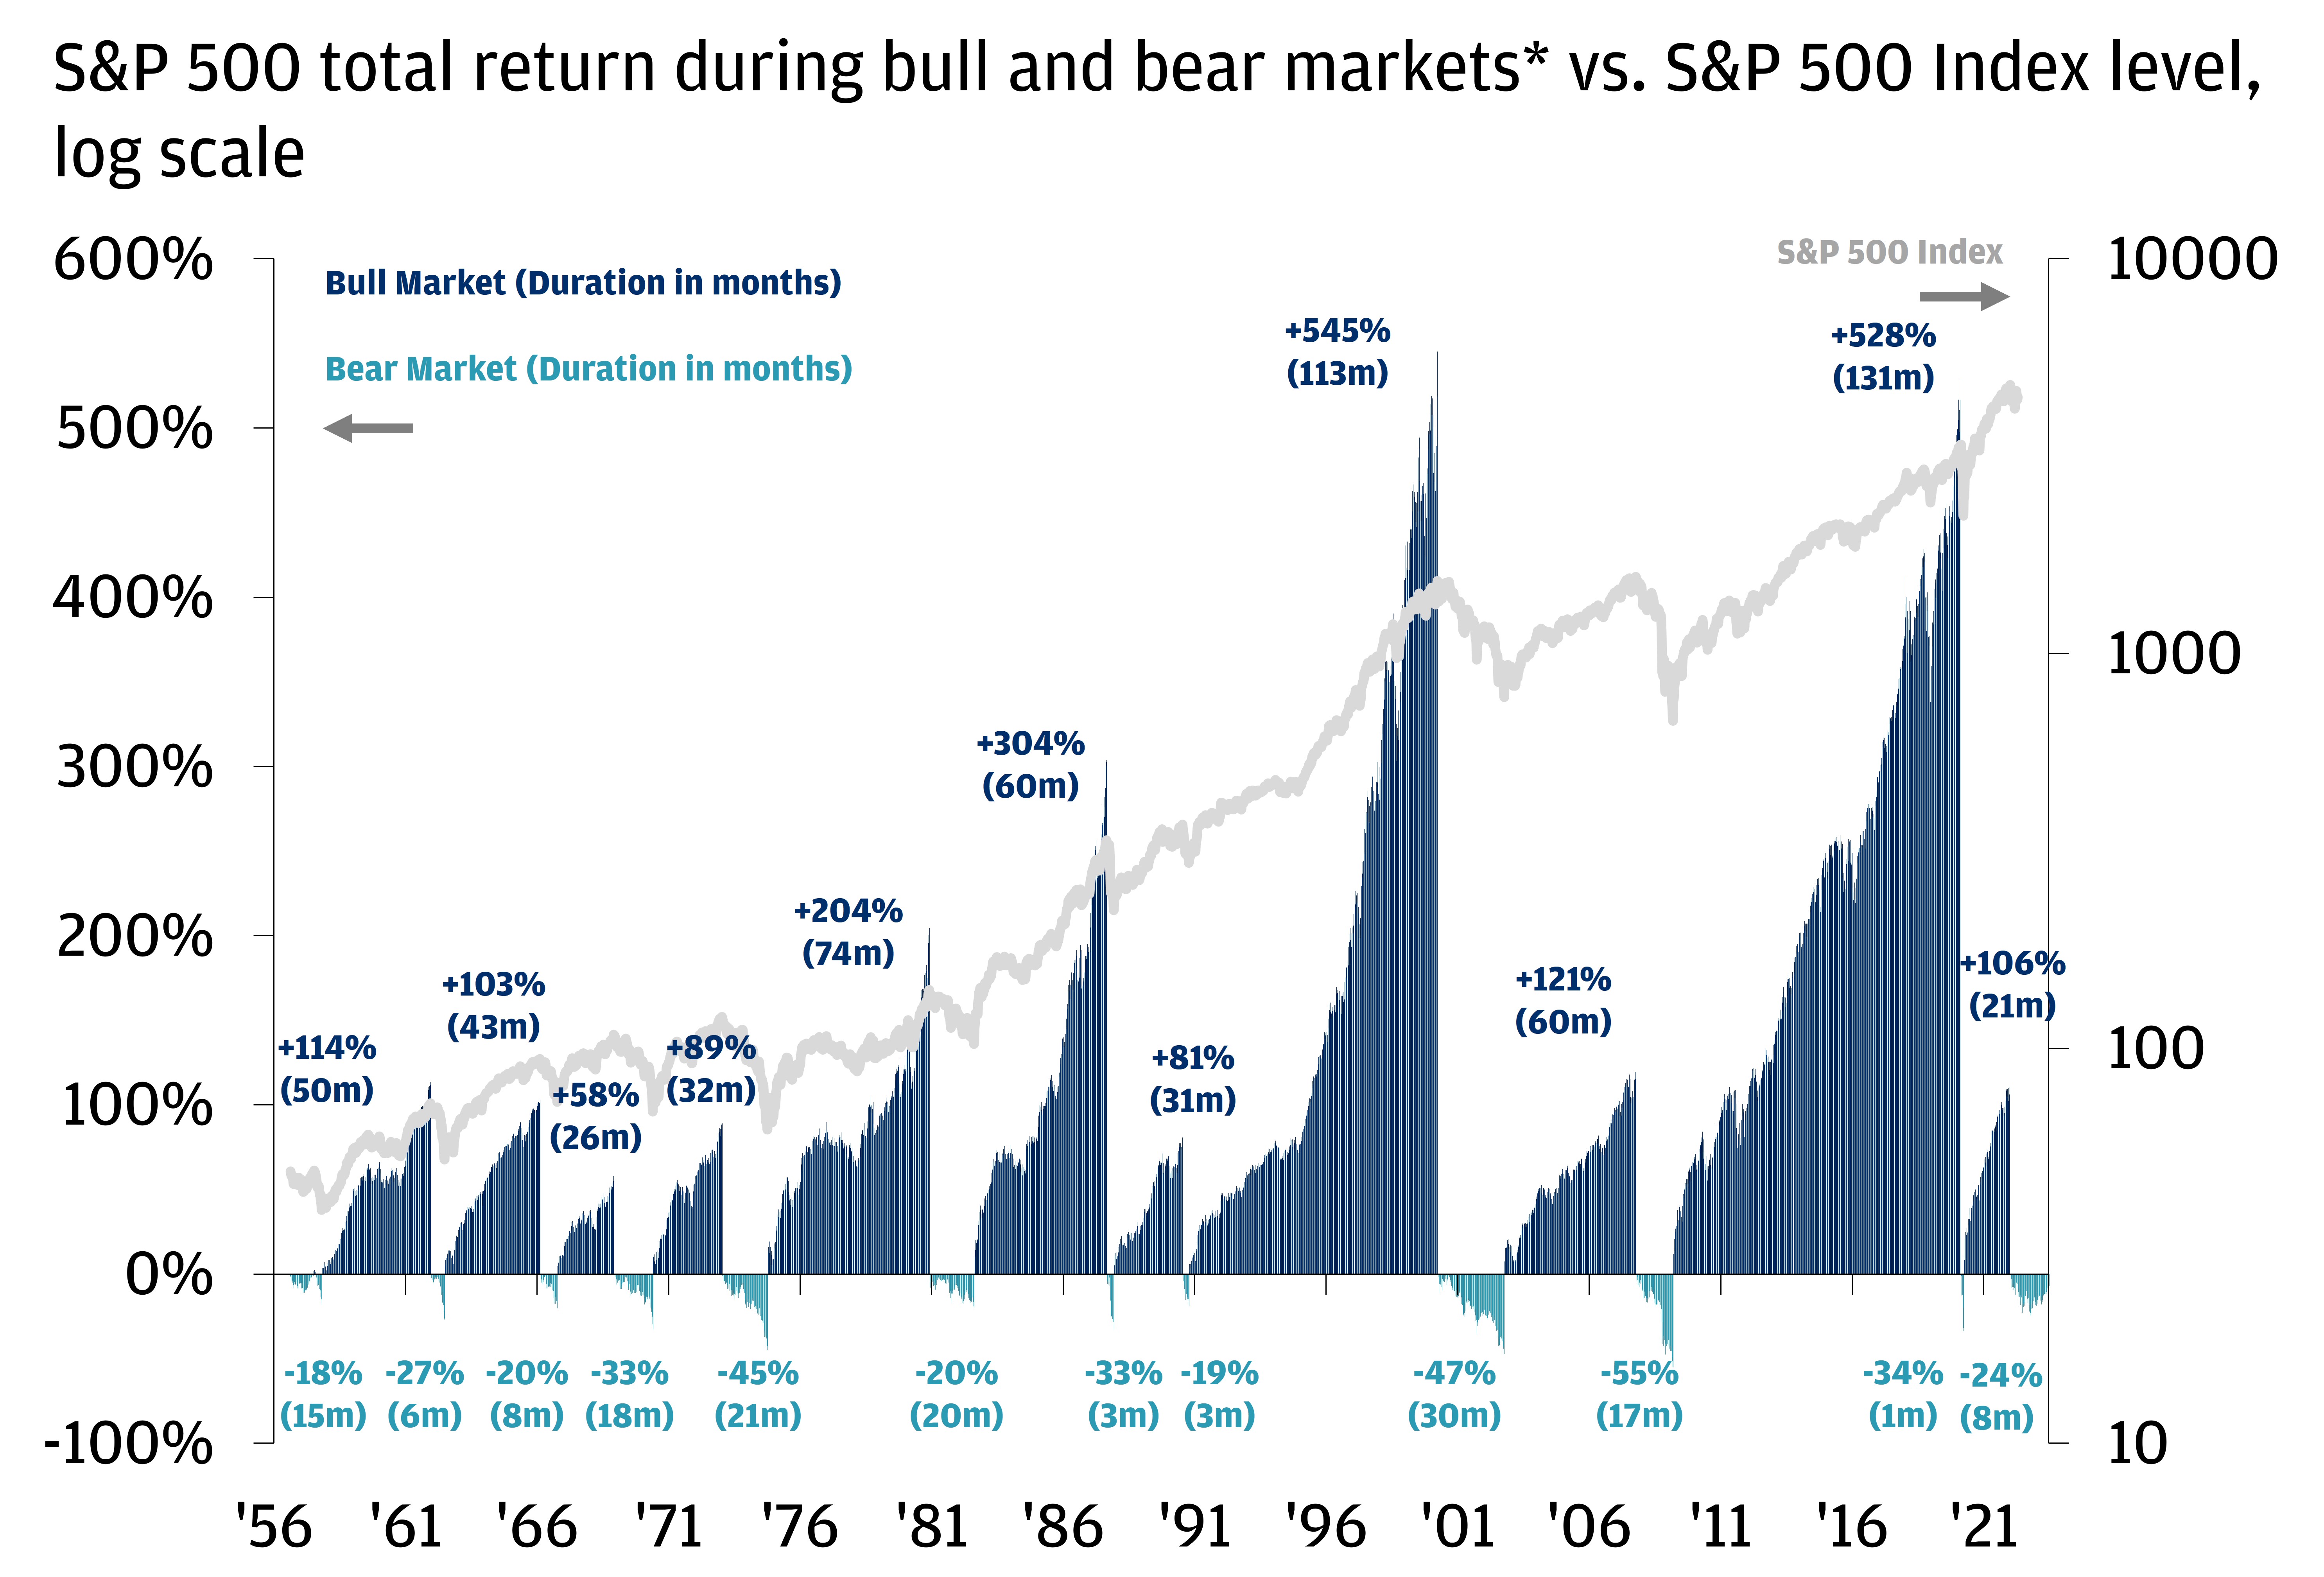 The chart describes a history of S&P 500 bull and bear markets and it’s done in a clustered column format.